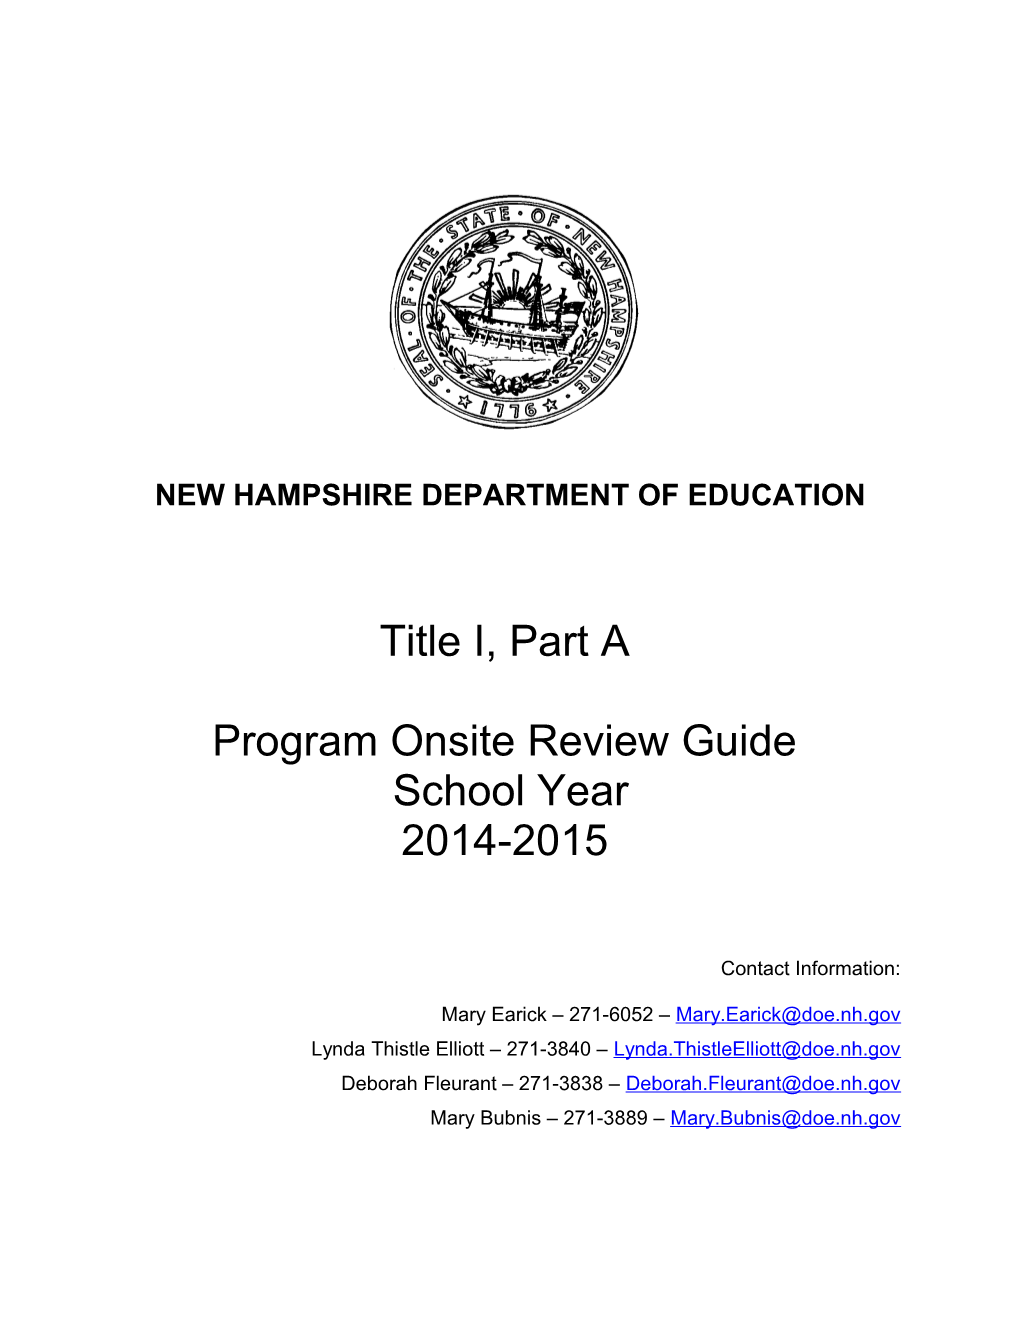 New Hampshire Department of Education